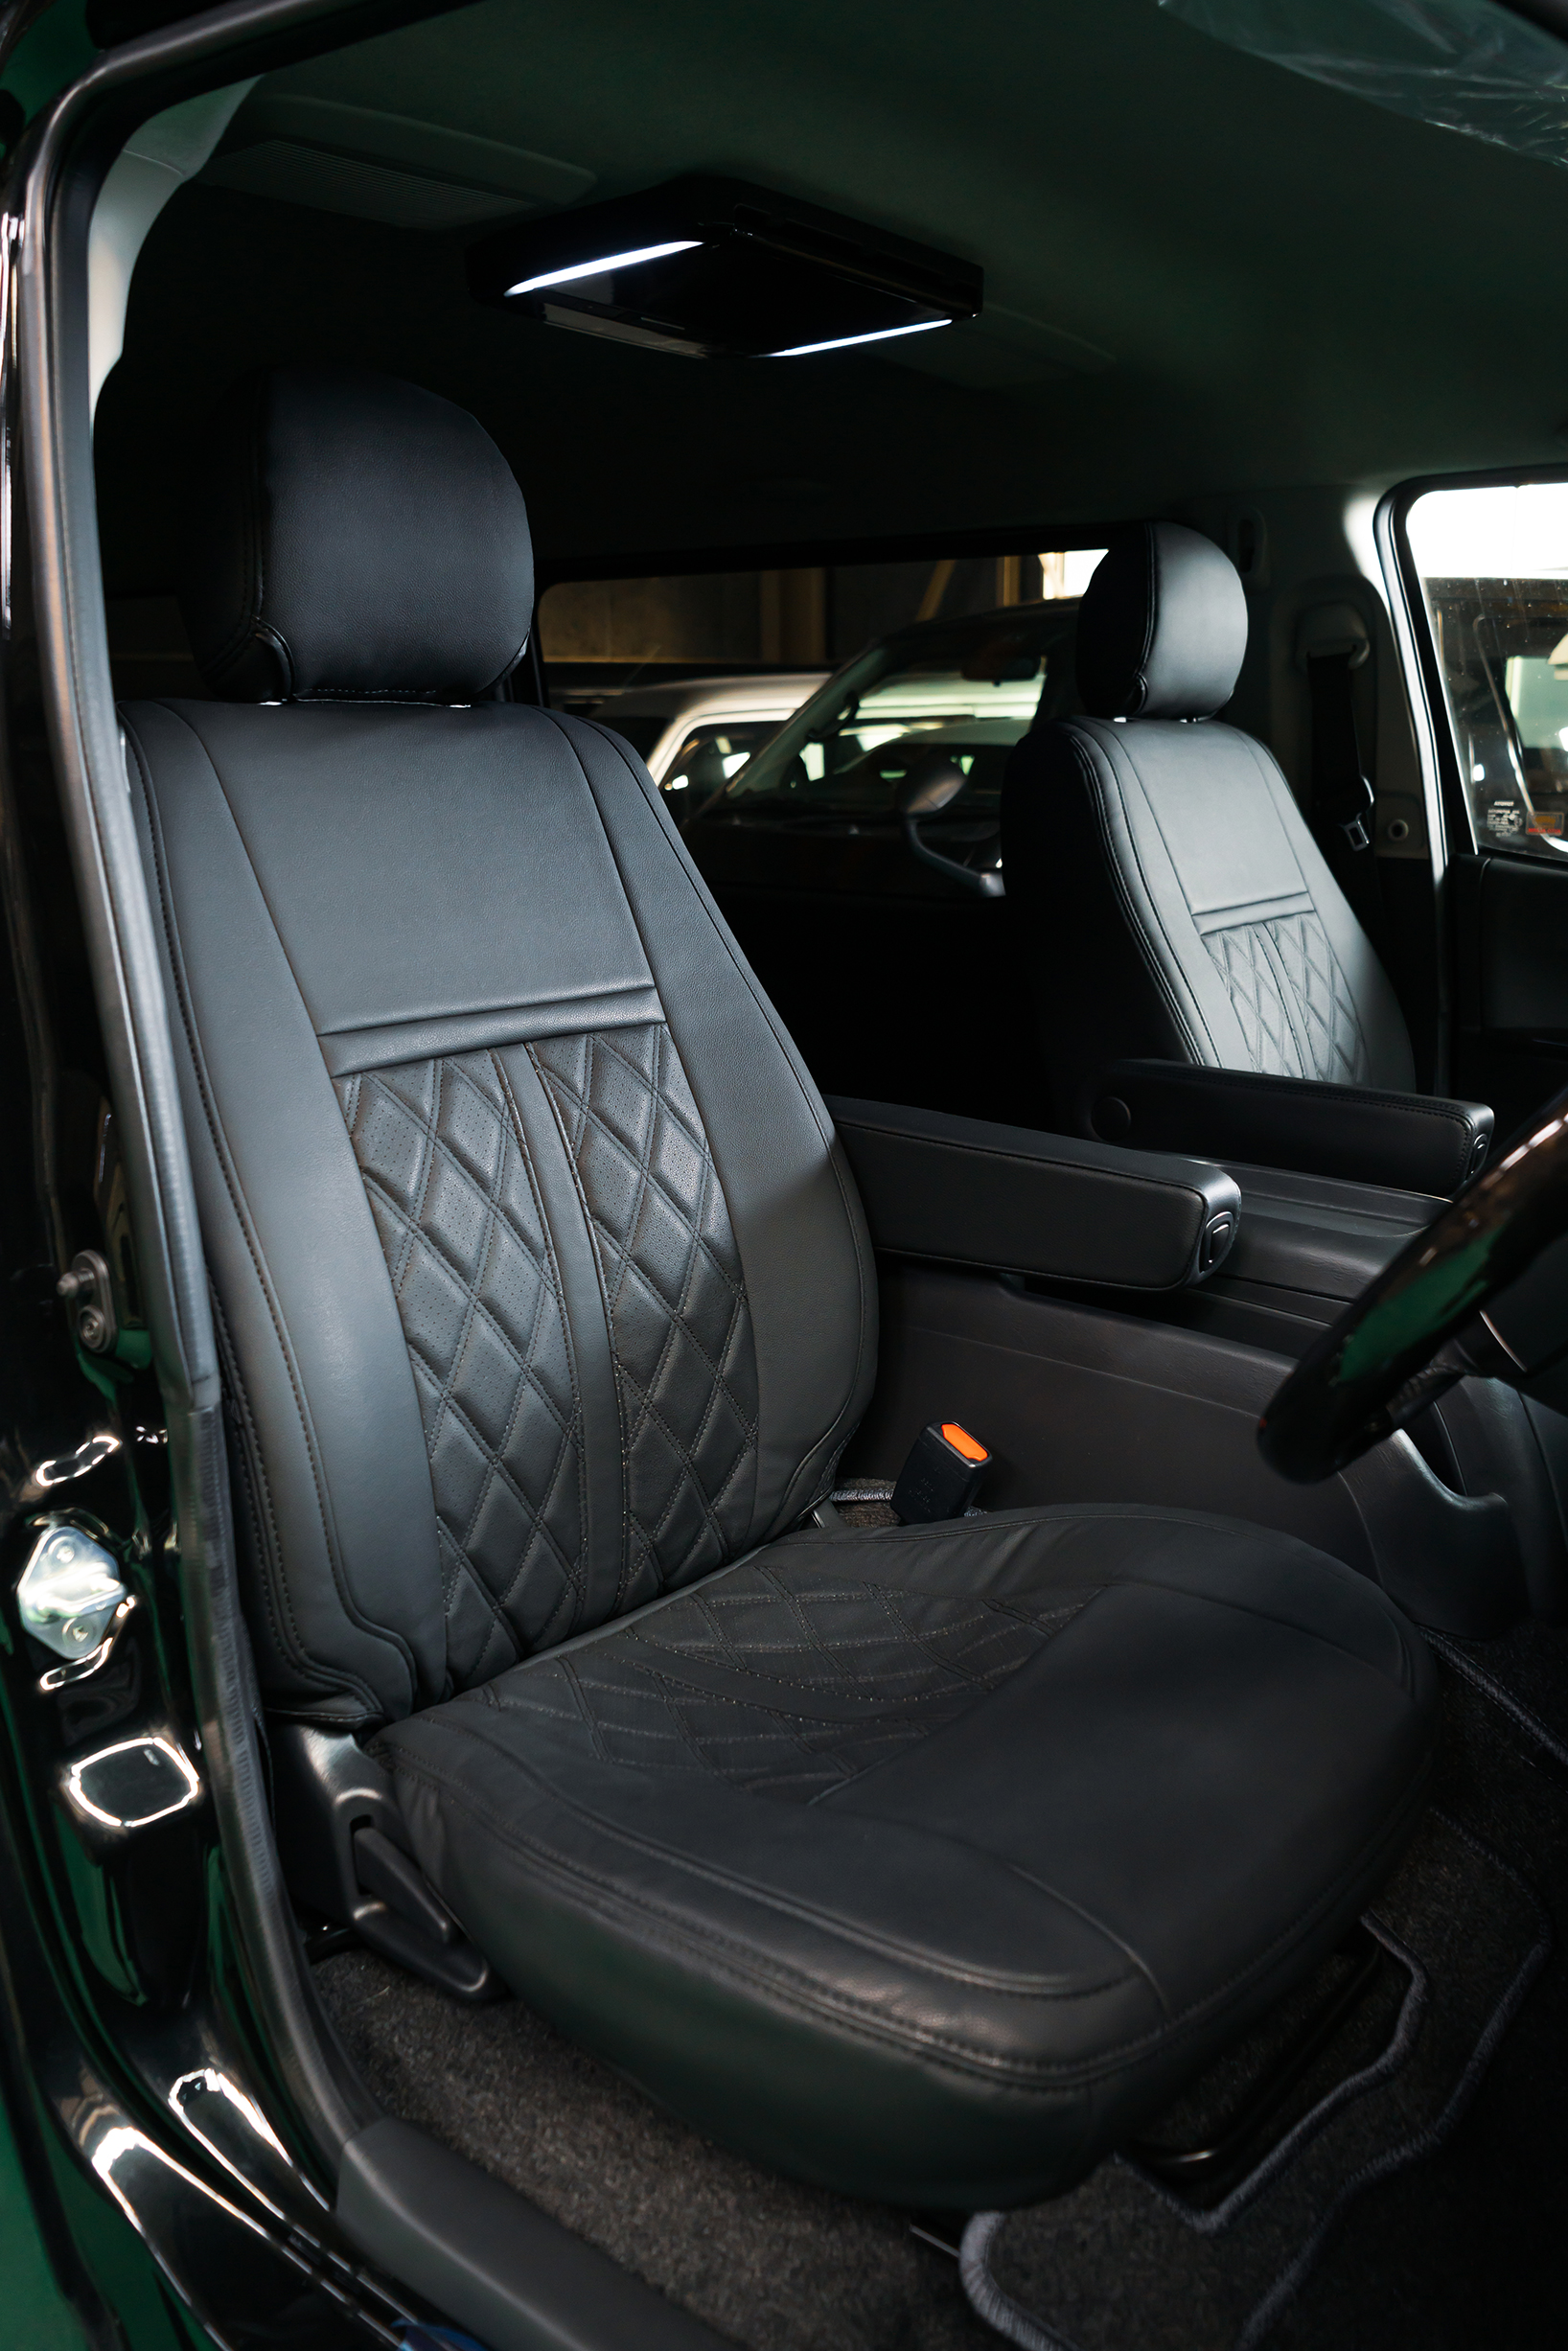 EXTRA ARMREST for HIACE ｜エクストラ アームレスト for ハイエース 